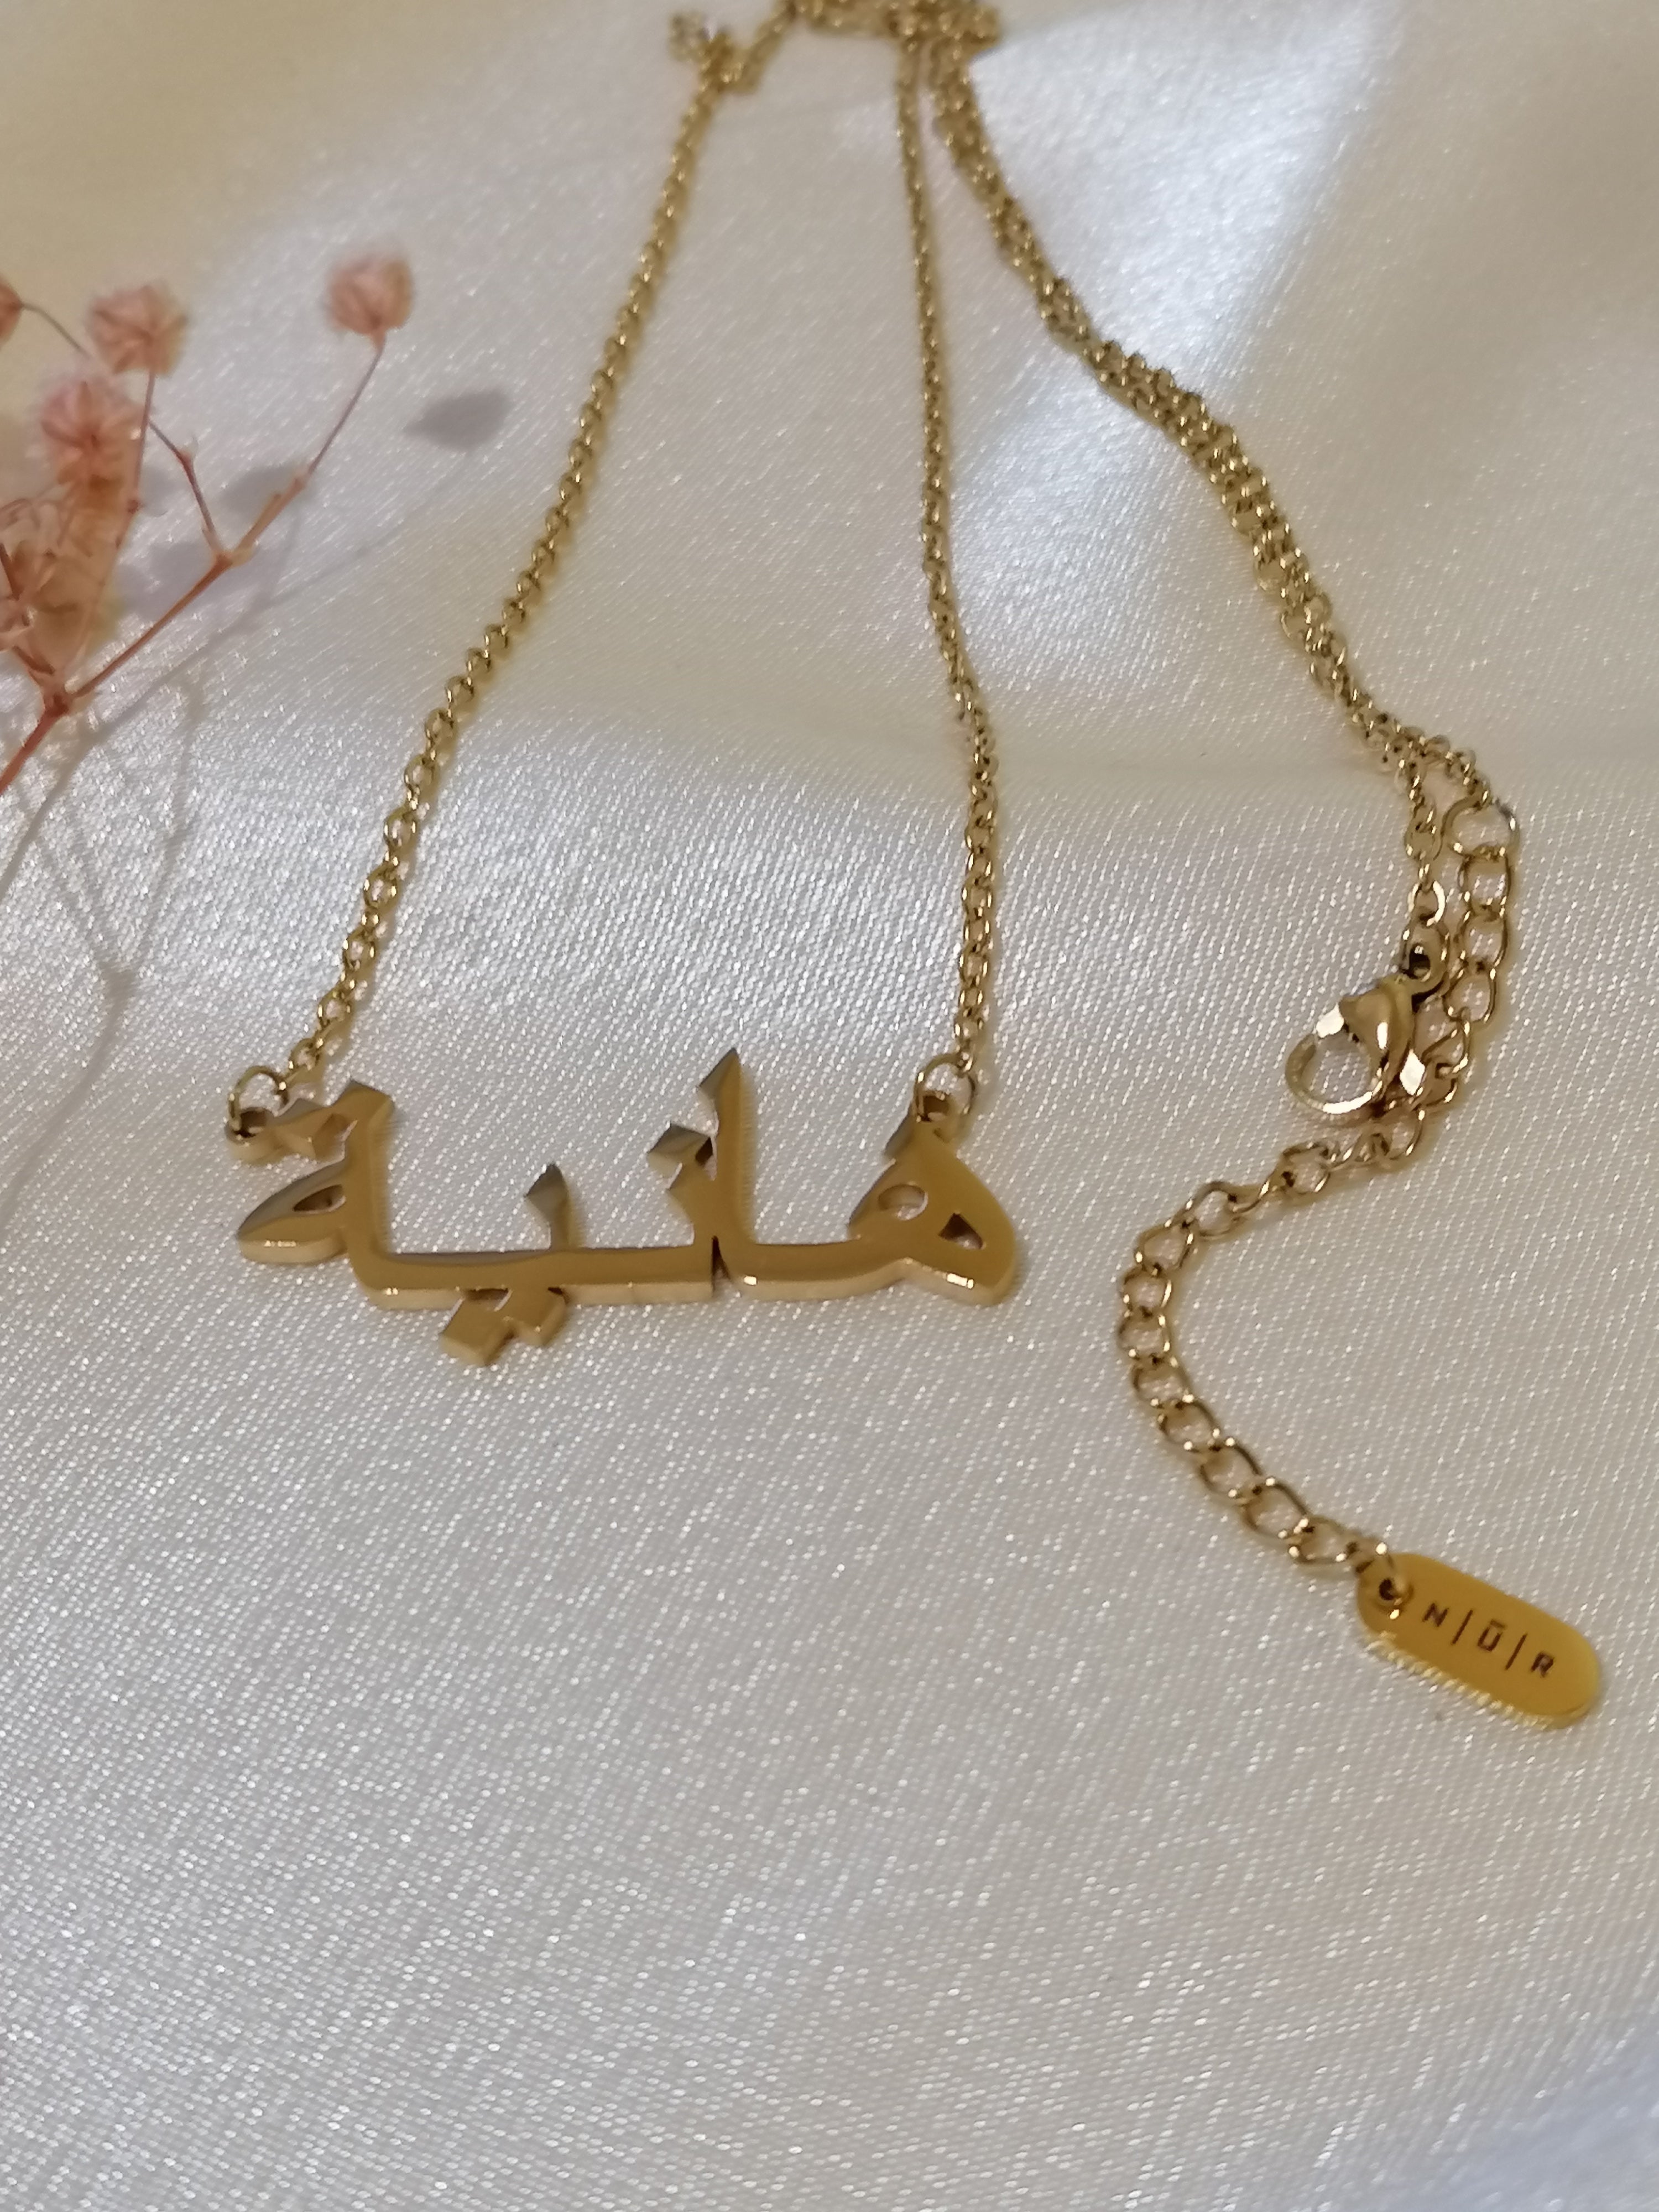 Personalized Arabic Name Custom Necklaces For Women Men Gold Silver Color  Stainless Steel Chain Pendant Necklace Jewelry - Customized Necklaces -  AliExpress